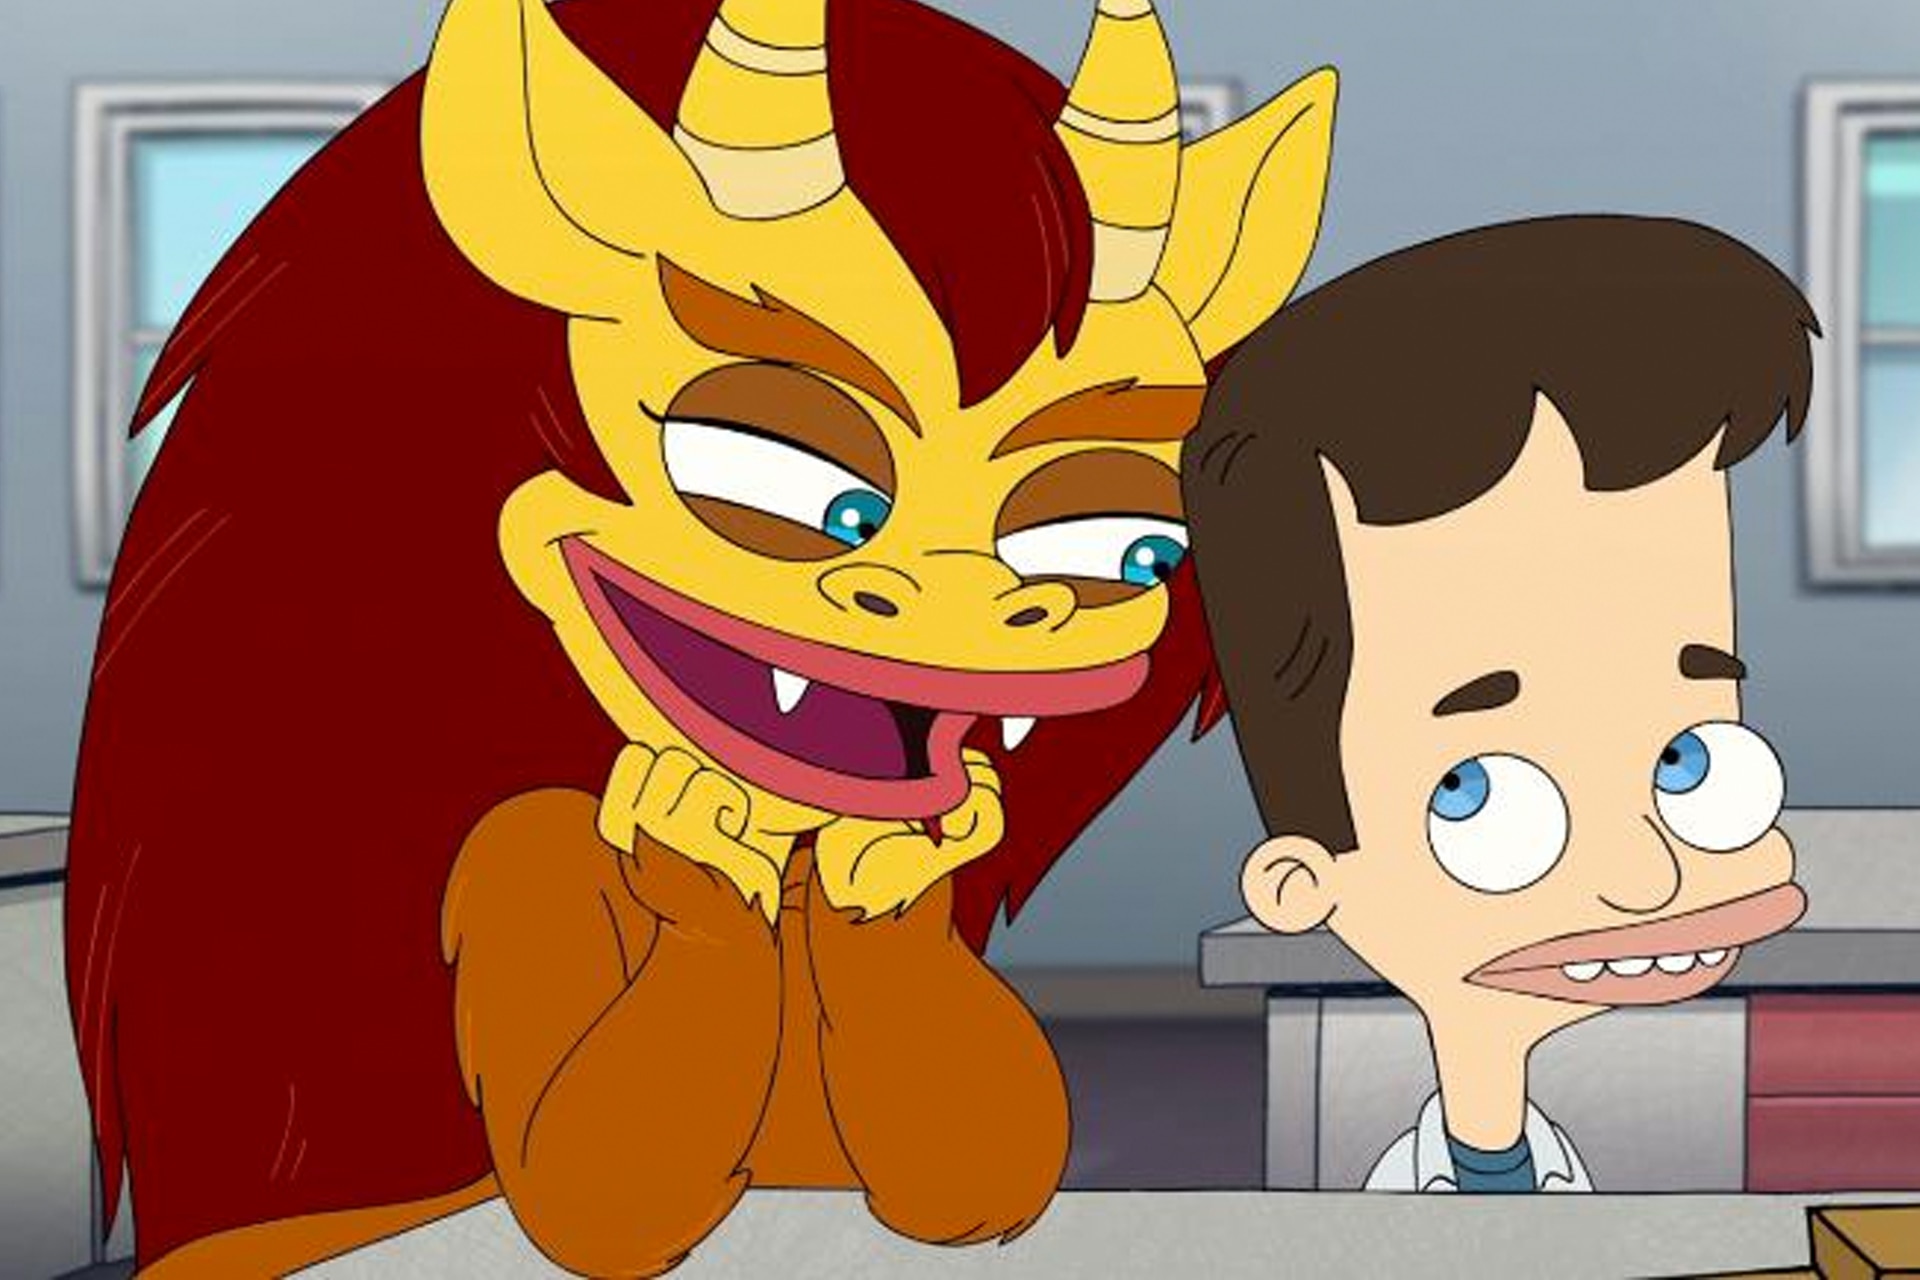 Big Mouth Cartoon Porn - Netflix Is Making A Show Based On The Monsters From Big Mouth - GQ Australia